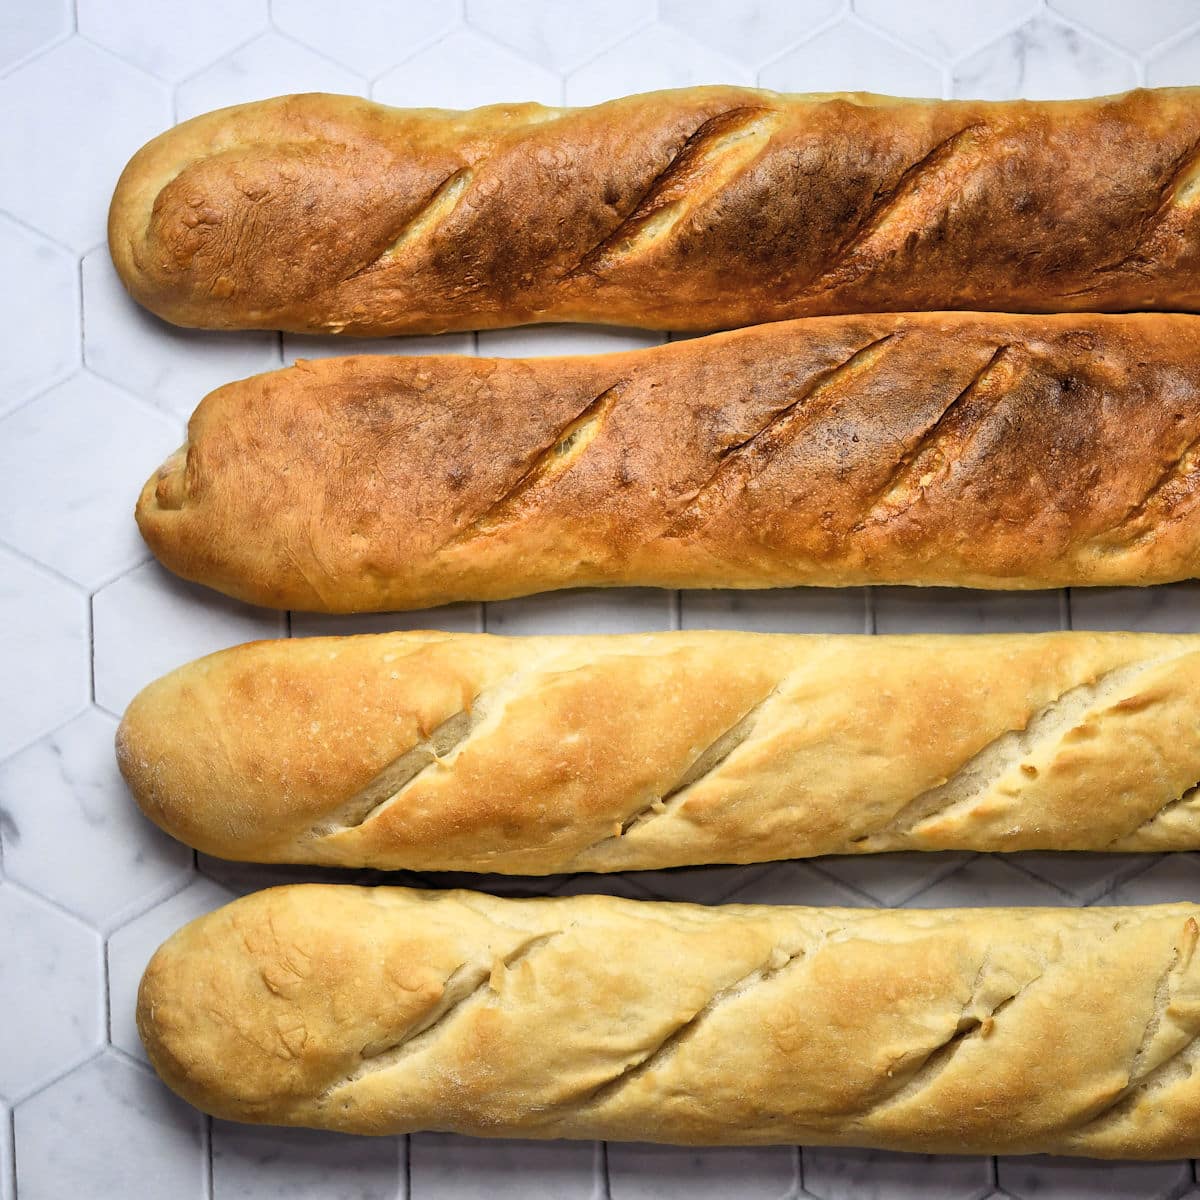 baguette loaves in different crust colors from dark to light